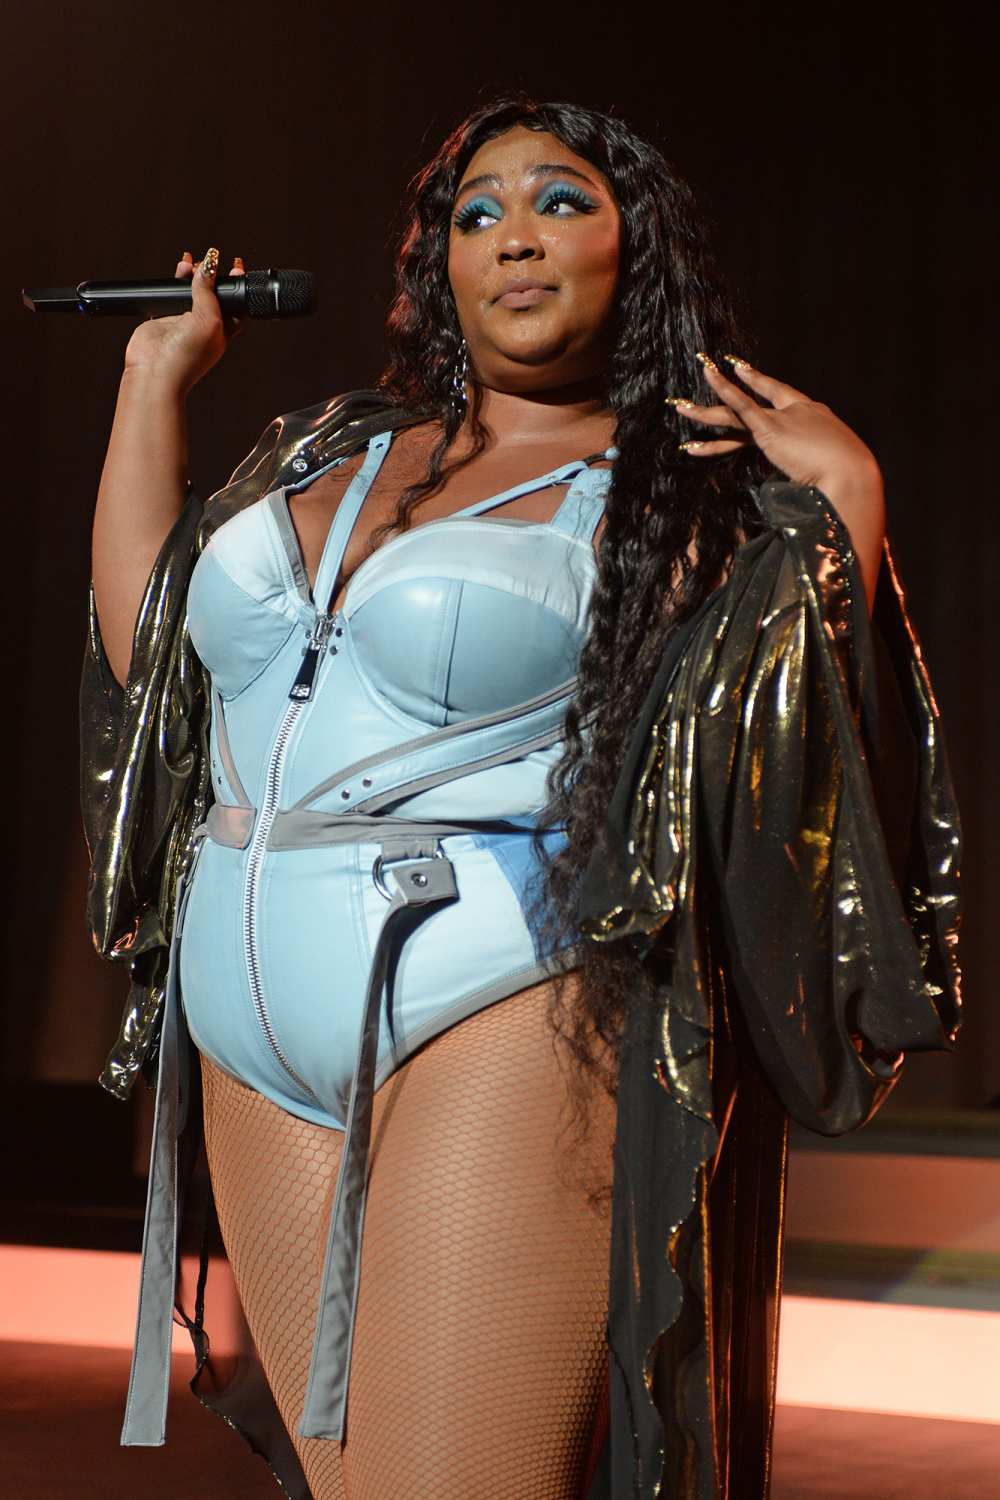 Lizzo Claims Postmates Delivery Person Stole Her Food